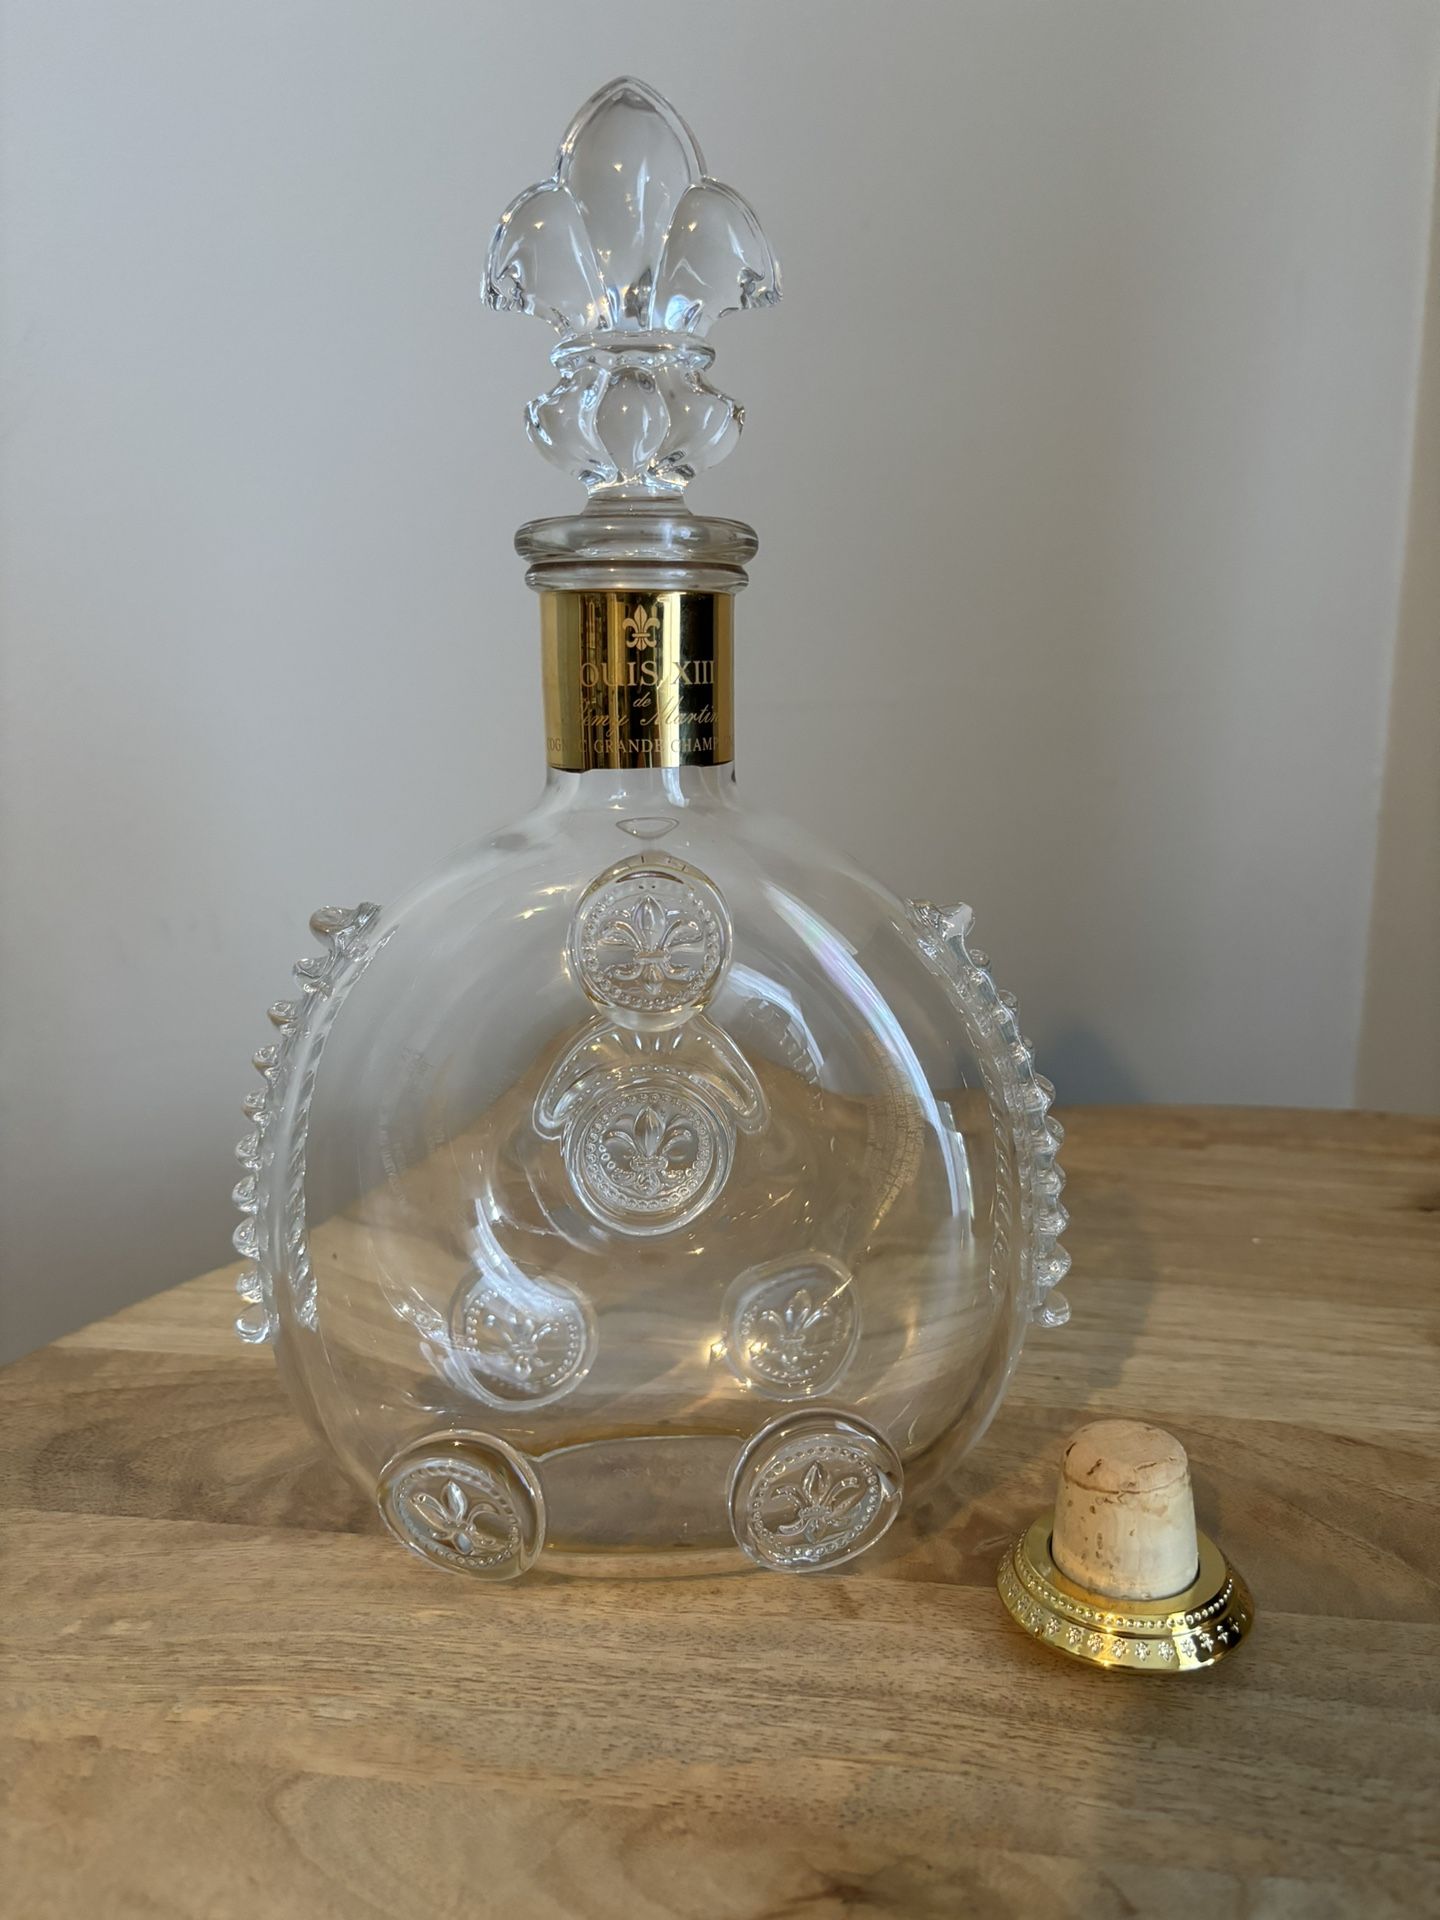 LOUIS XIII Baccarat Decanter 